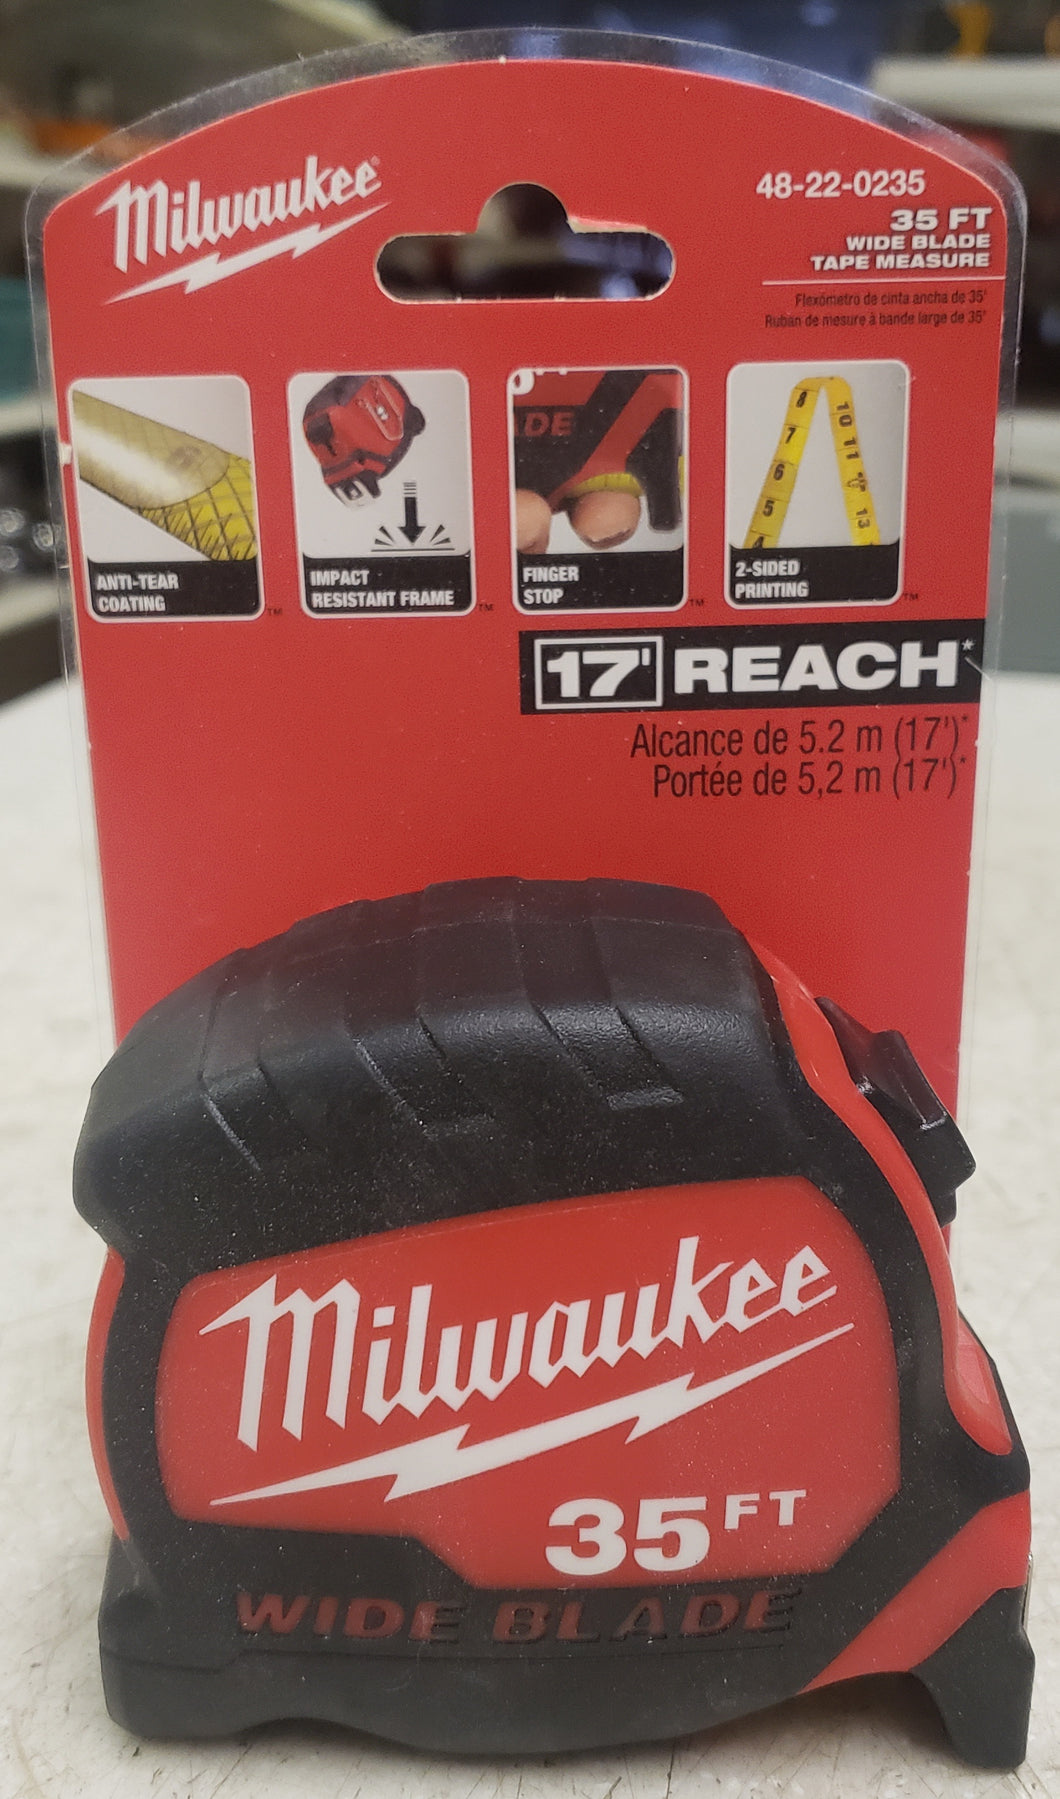 Milwaukee 48-22-0235 35 ft. x 1-5/16 in. Wide Blade Tape Measure with 17 ft. Reach